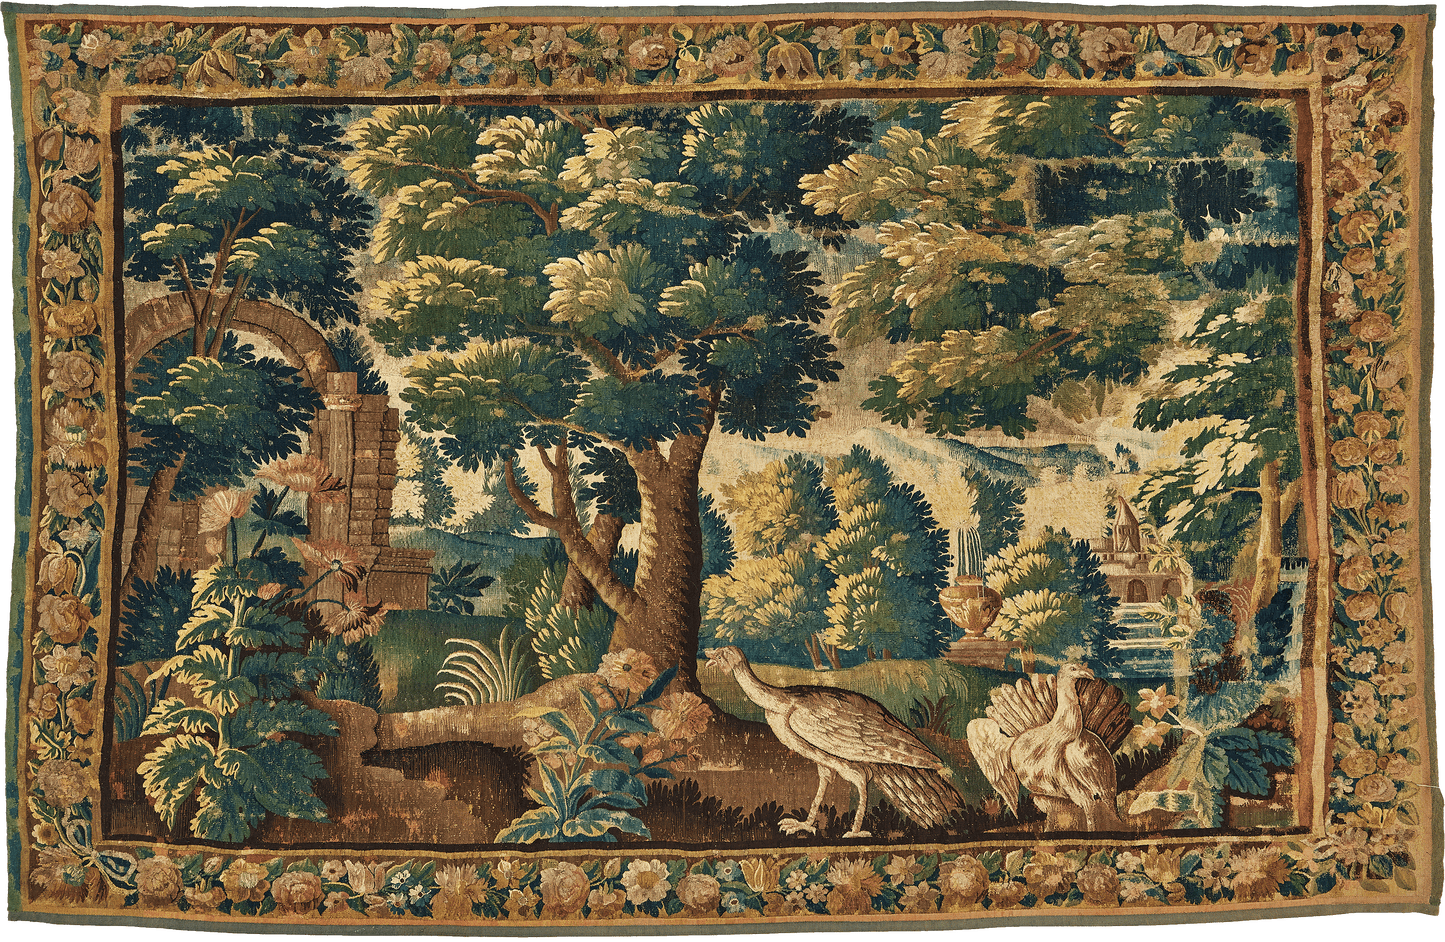 This verdure tapestry is a striking representation of a bucolic landscape, exquisitely crafted to bring the tranquility of nature into any room. The scene unfolds with towering trees and vibrant greenery, meticulously woven to capture the essence of a secluded grove. A quaint stone archway leads to a serene water feature, further enhancing the peacefulness of the tableau. re588996 